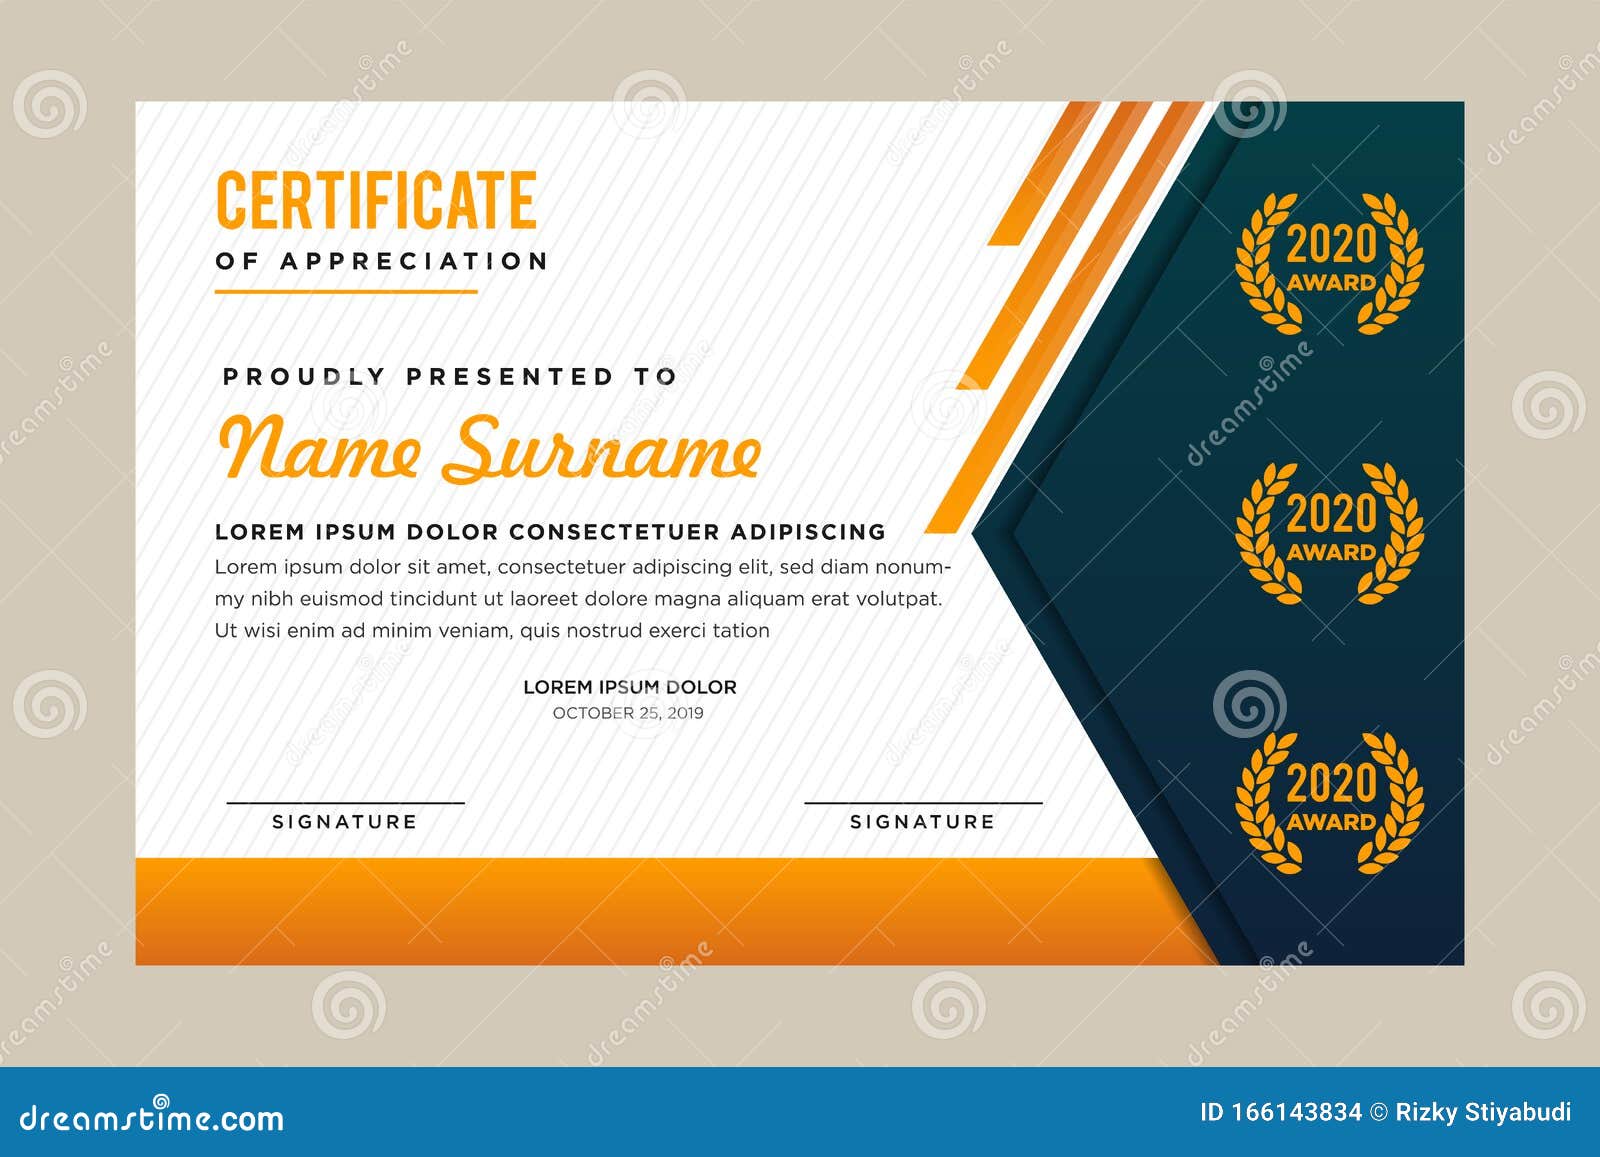 Premium Modern Certificate Template with Dark Green Texture and With Workshop Certificate Template